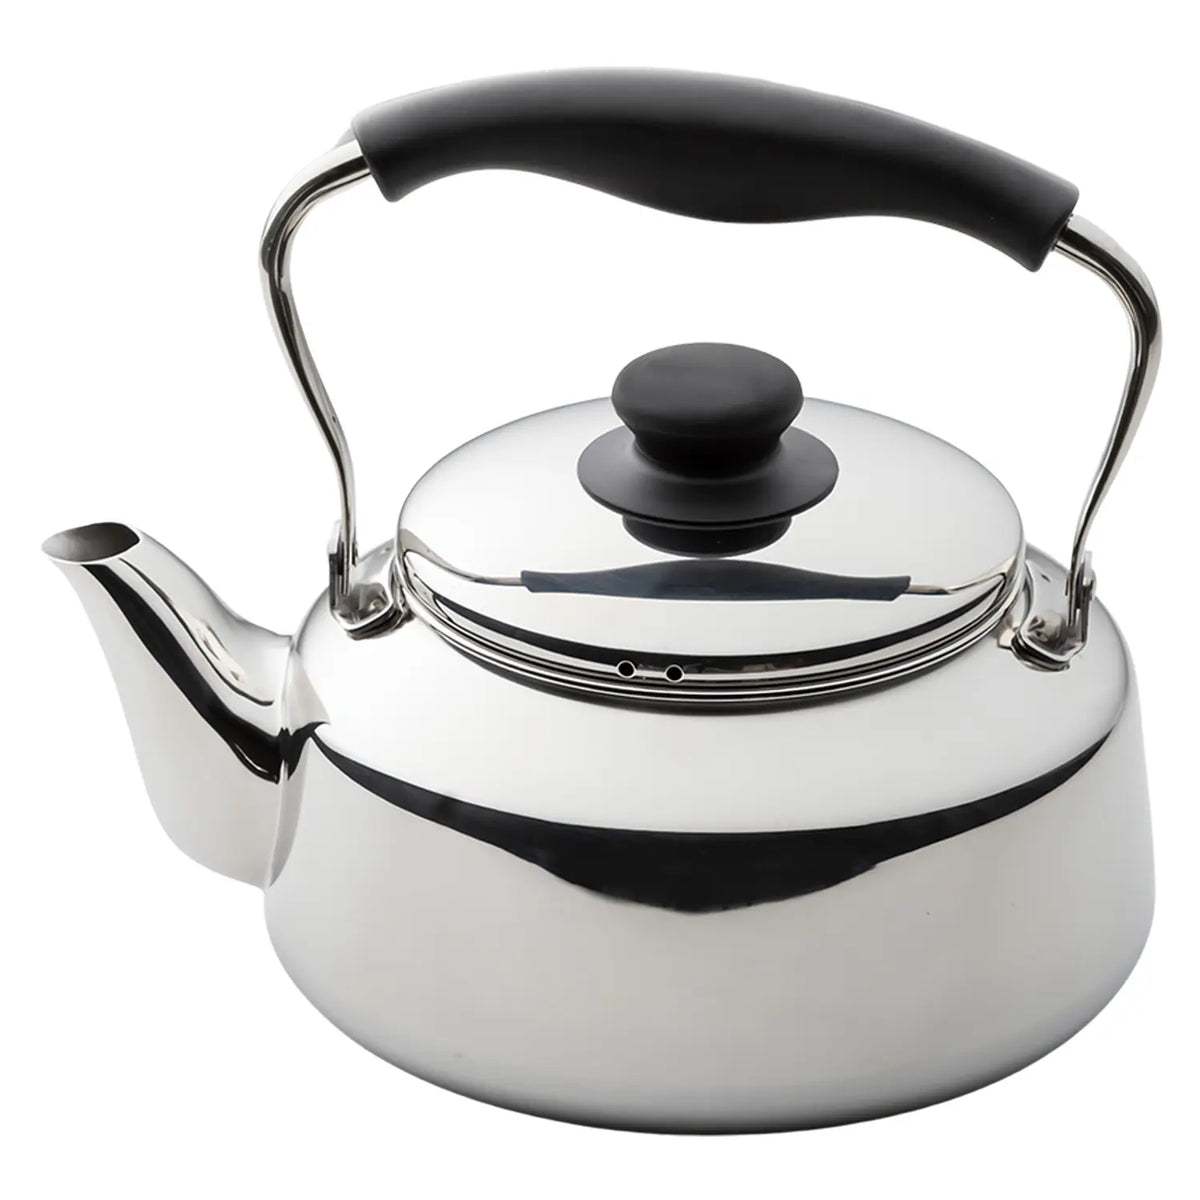 Kettles are cheaper than microwaves for 1 cup of boiled water - Mirror  Online